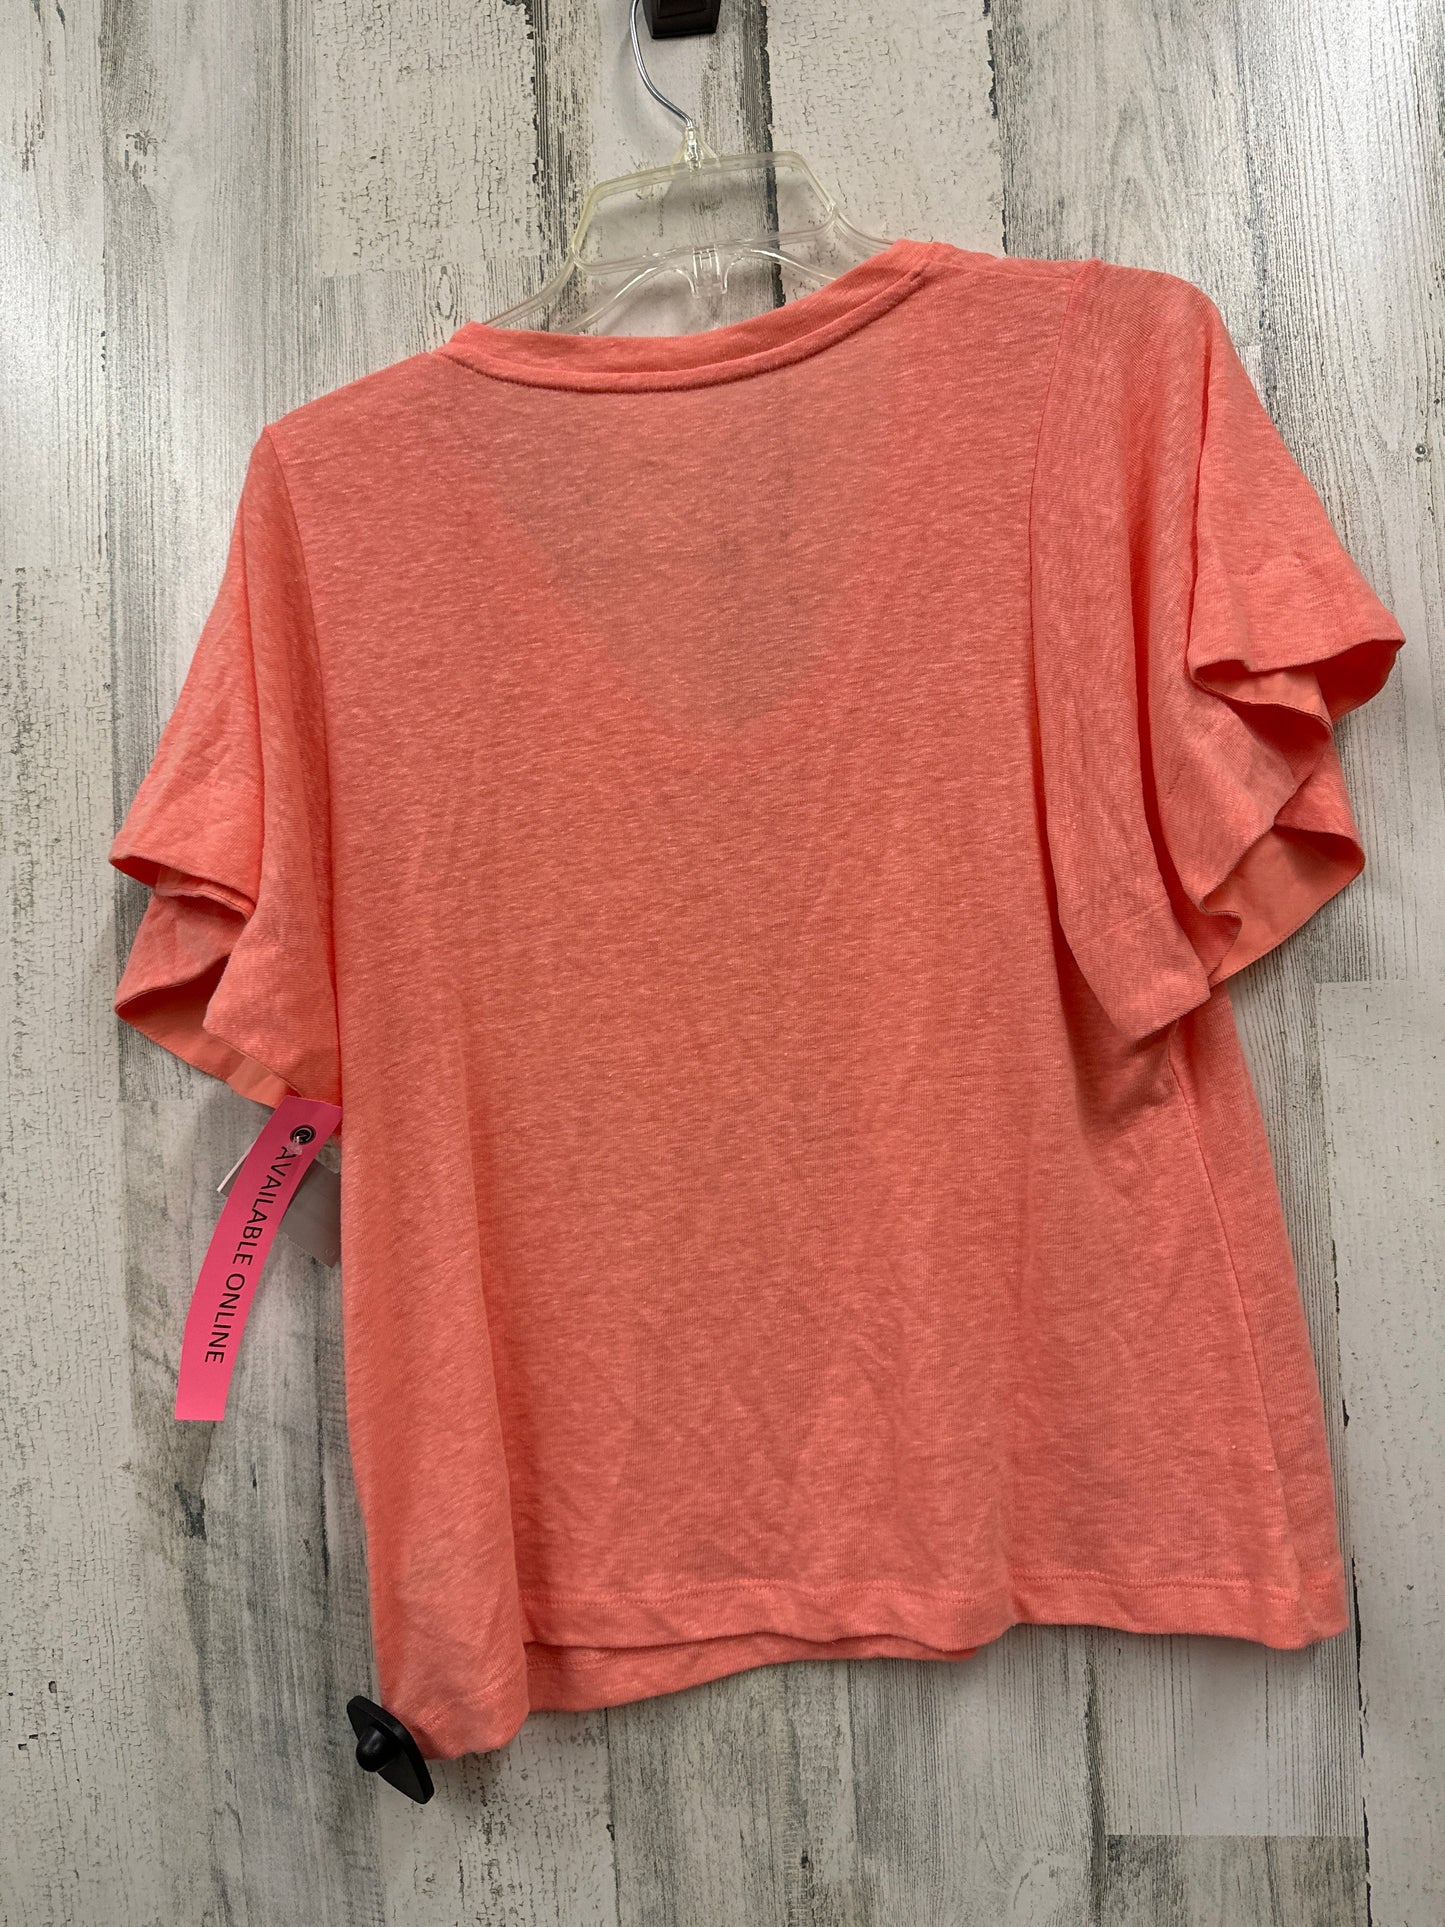 Top Short Sleeve By A New Day  Size: M